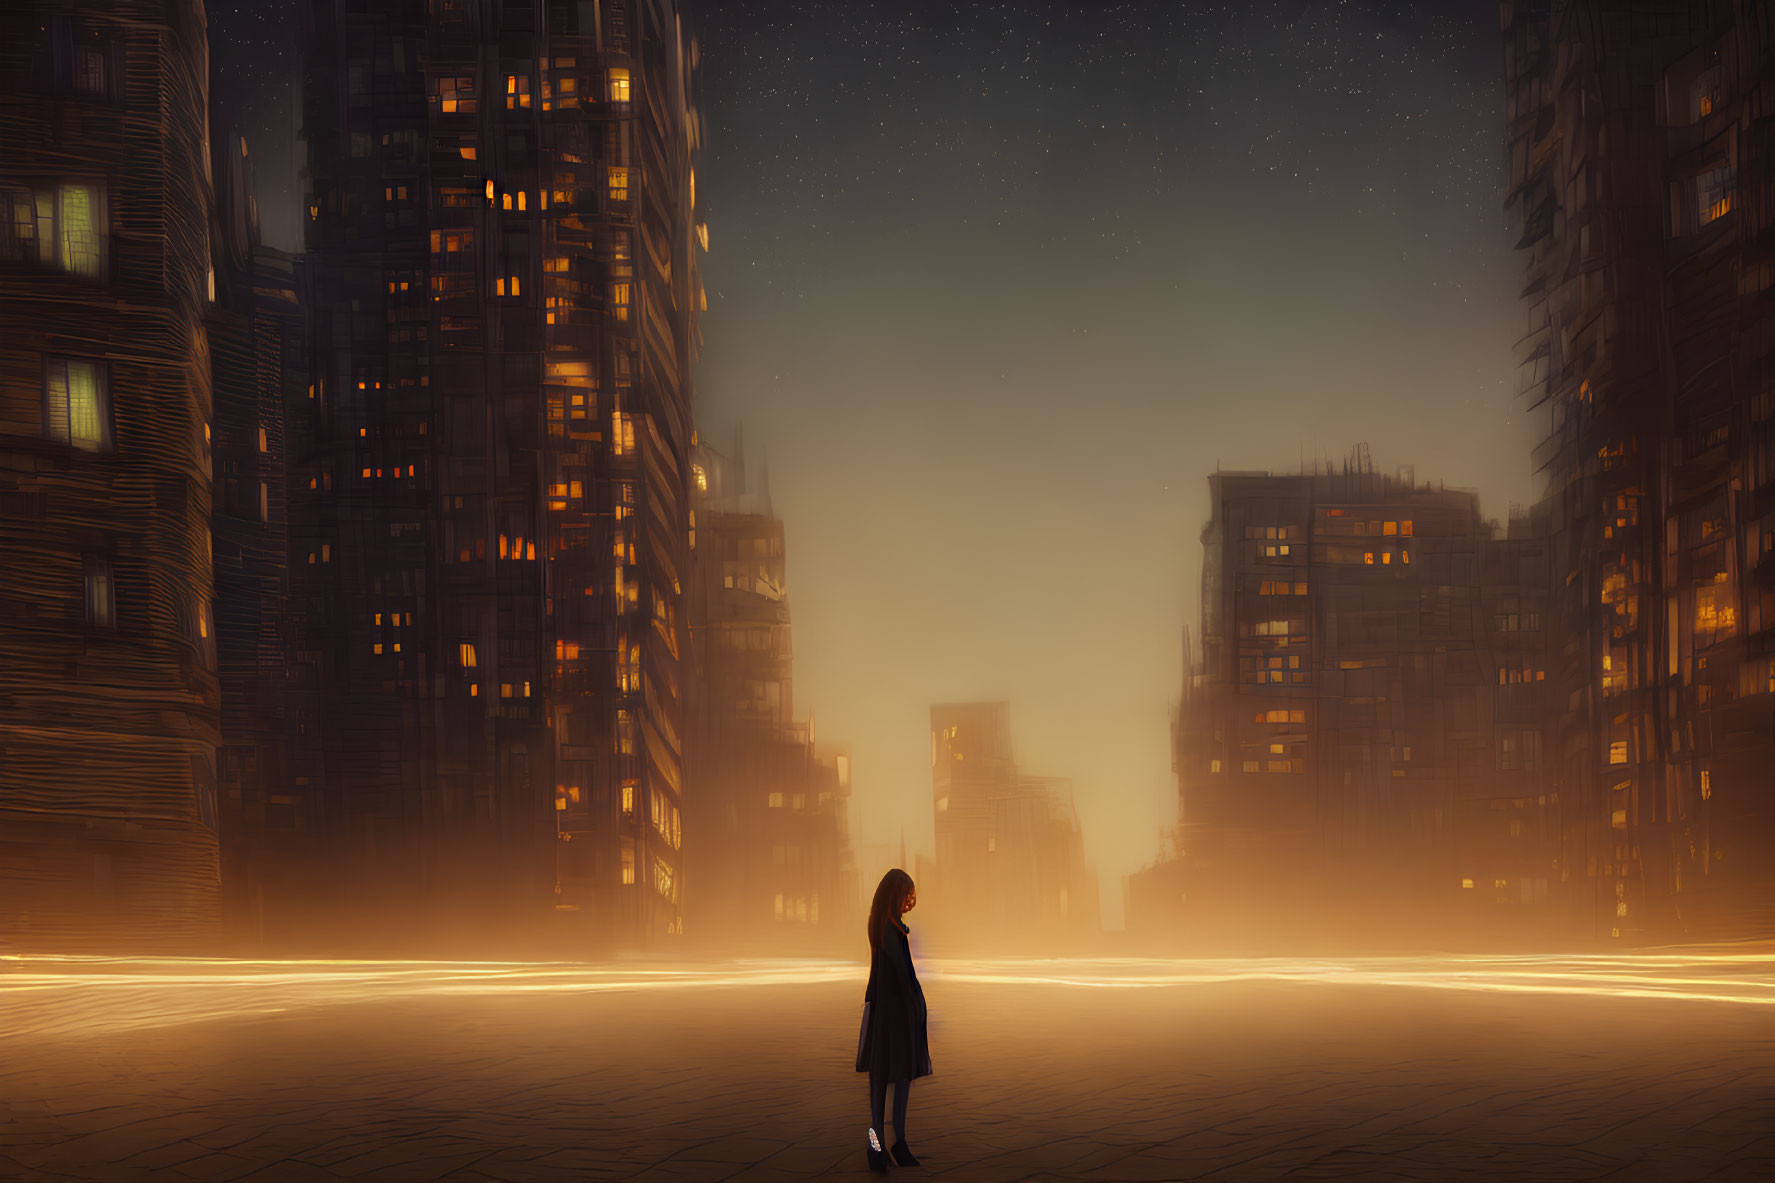 Lonely figure in urban night scene with starry sky and glowing light trails.